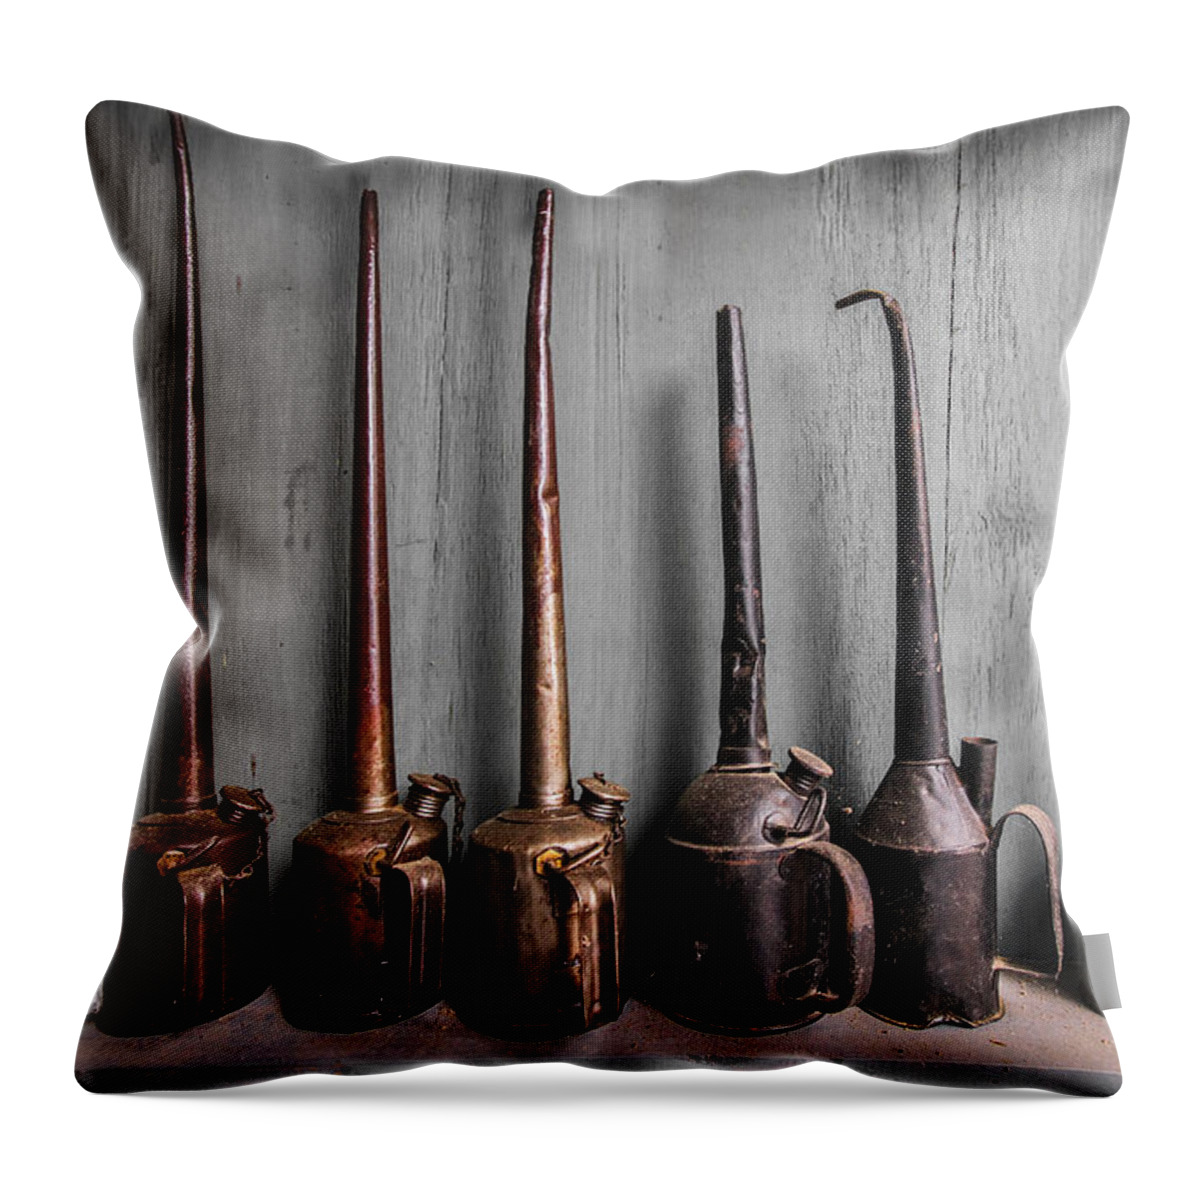 Appalachia Throw Pillow featuring the photograph Oil Can Collection by Debra and Dave Vanderlaan